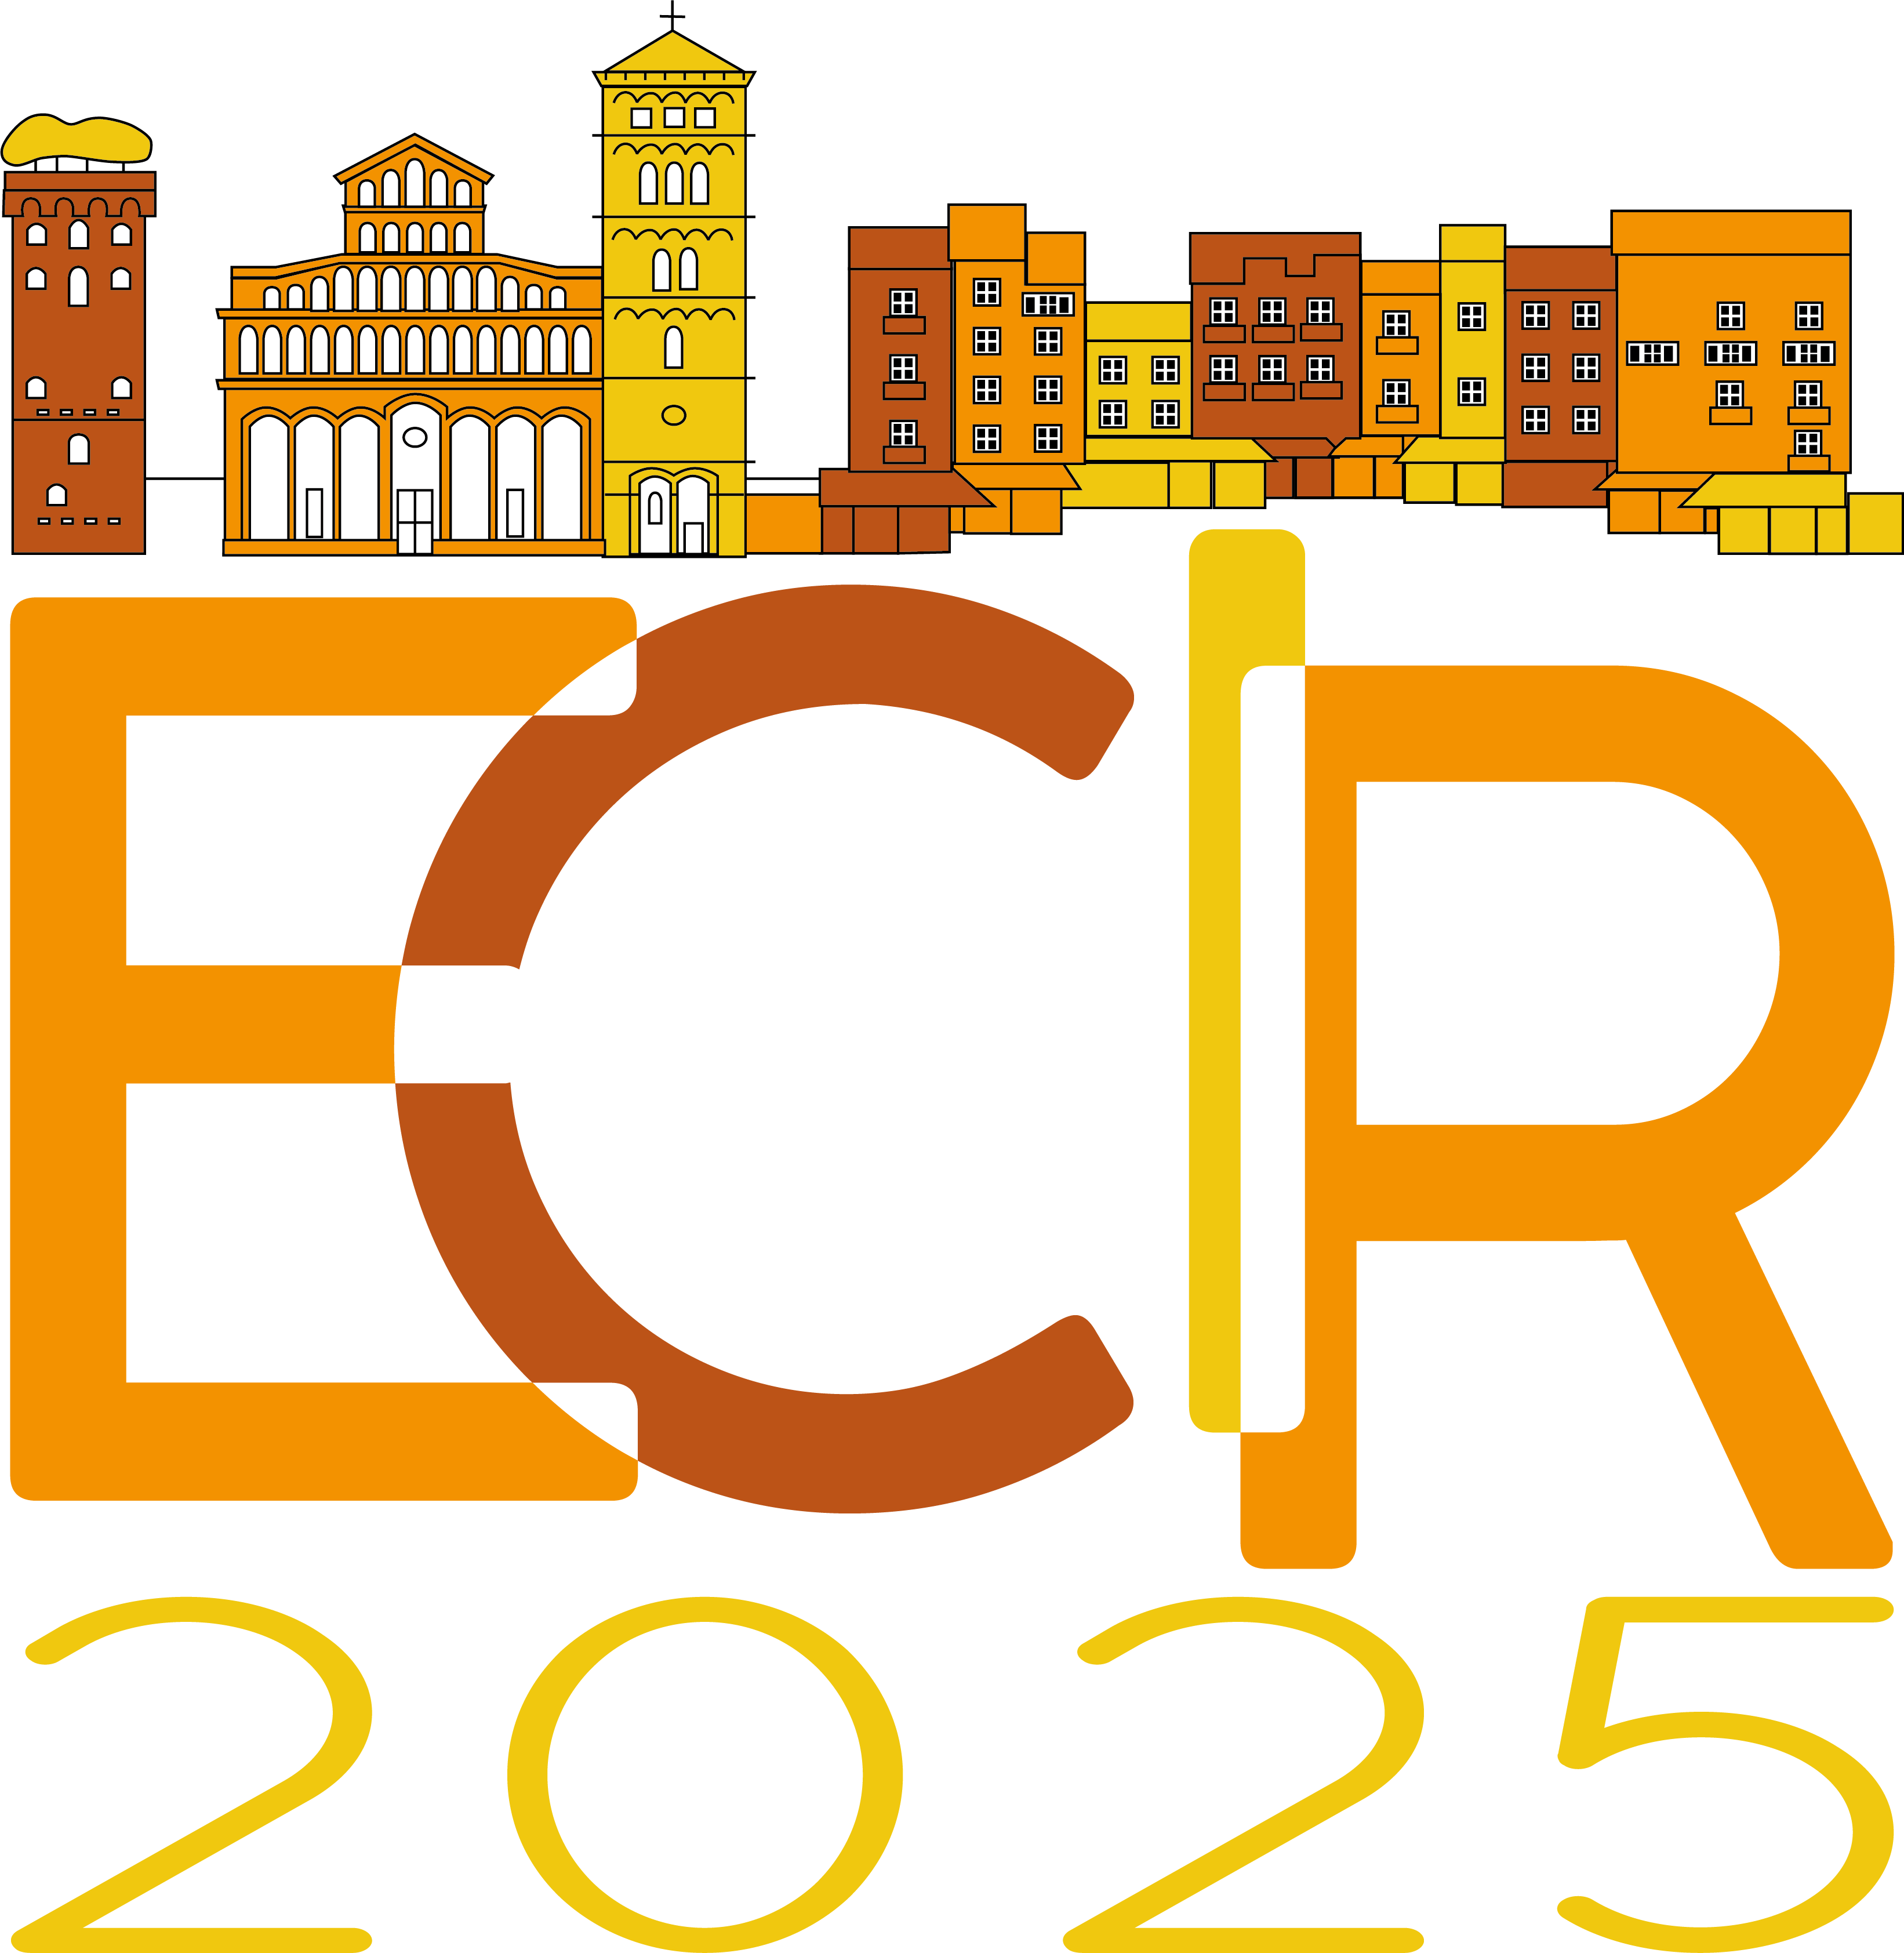 47th EUROPEAN CONFERENCE ON INFORMATION RETRIEVAL